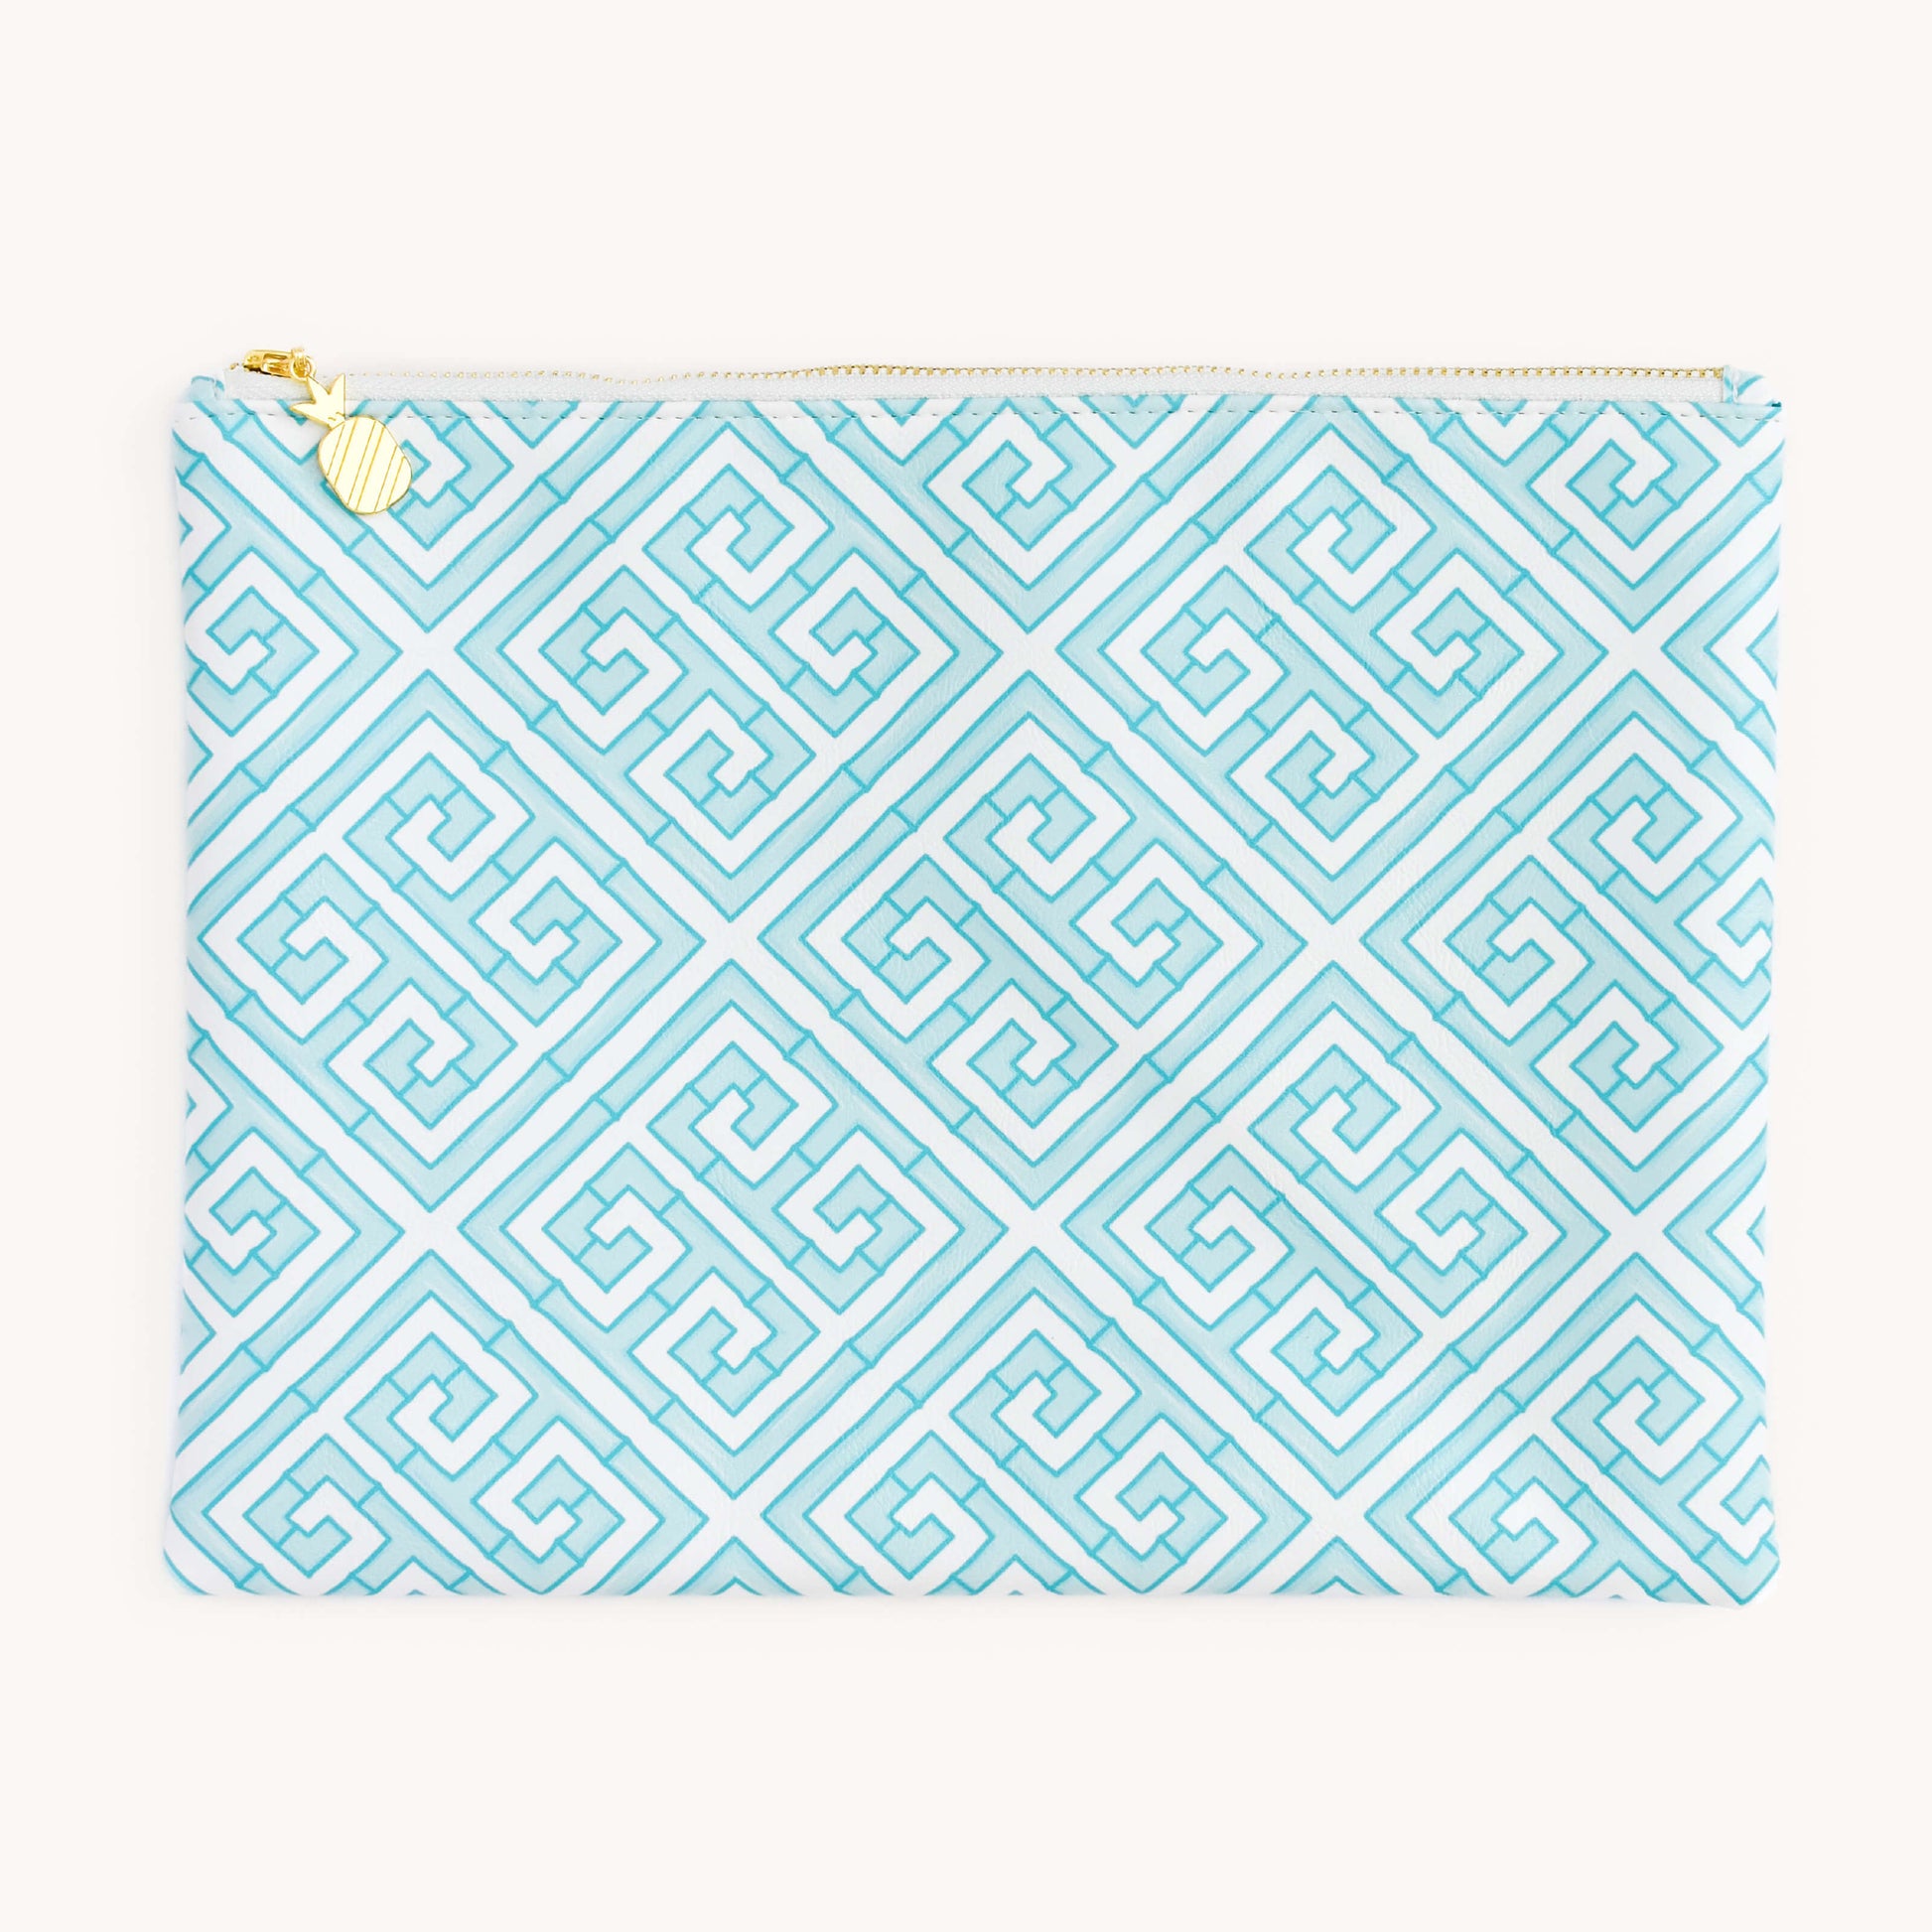 MINT MANDALAY PLANNER POUCH